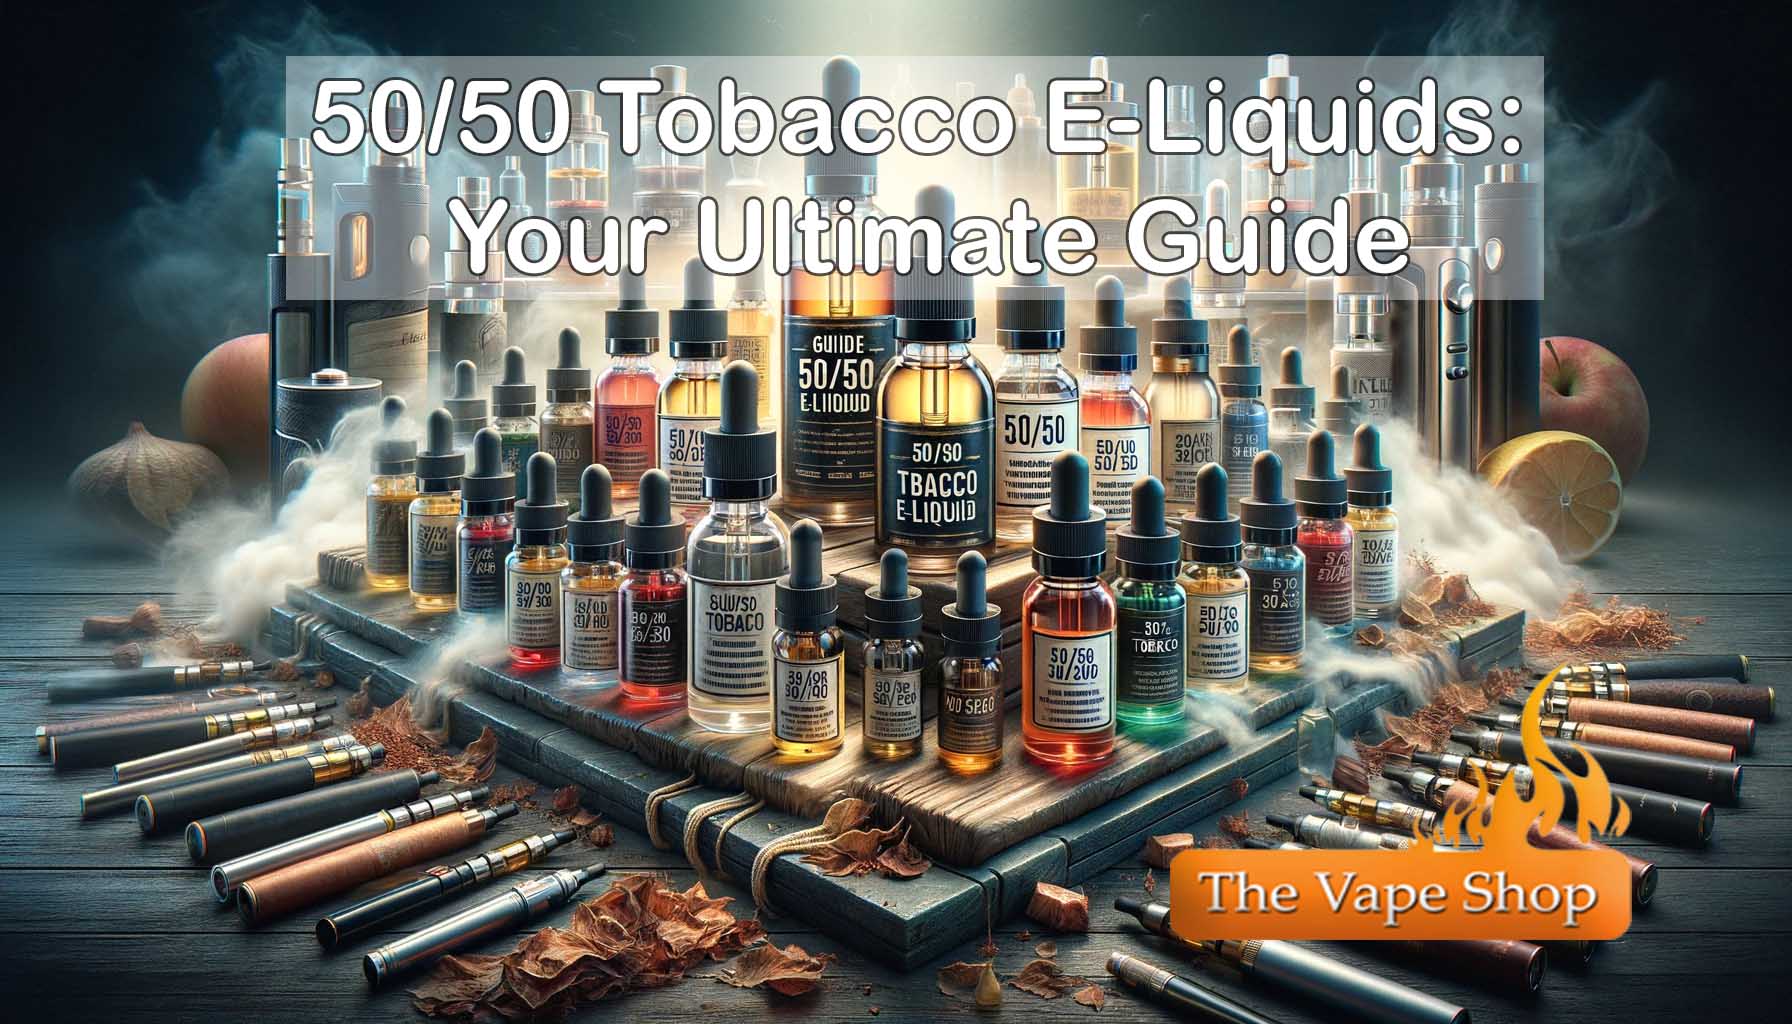 50/50 Tobacco E-Liquids: Your Ultimate Guide by The vape Shop